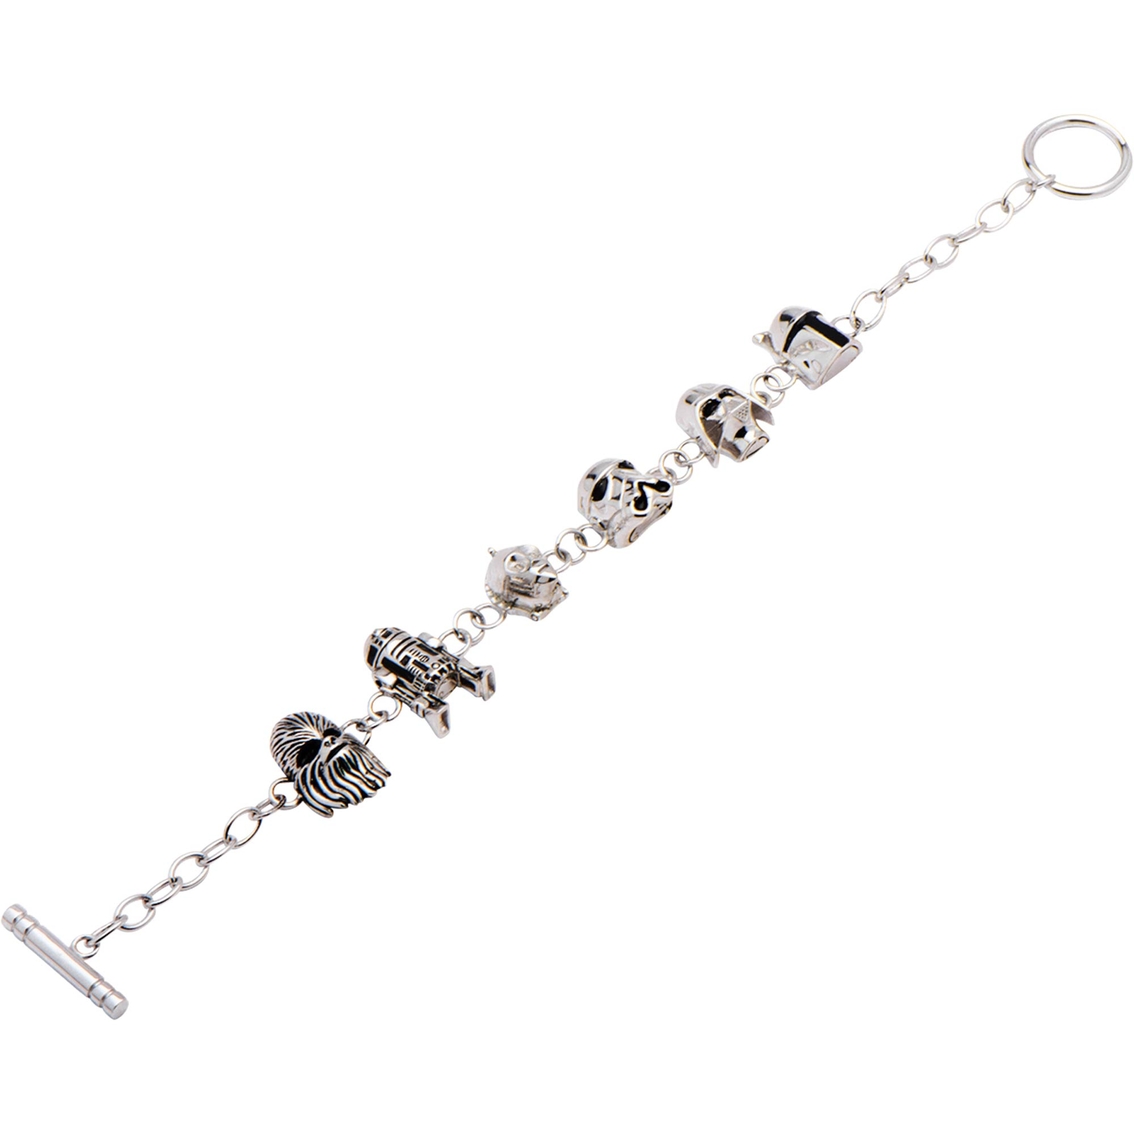 Star Wars Sterling Silver Character Charm Bracelet - Image 2 of 2